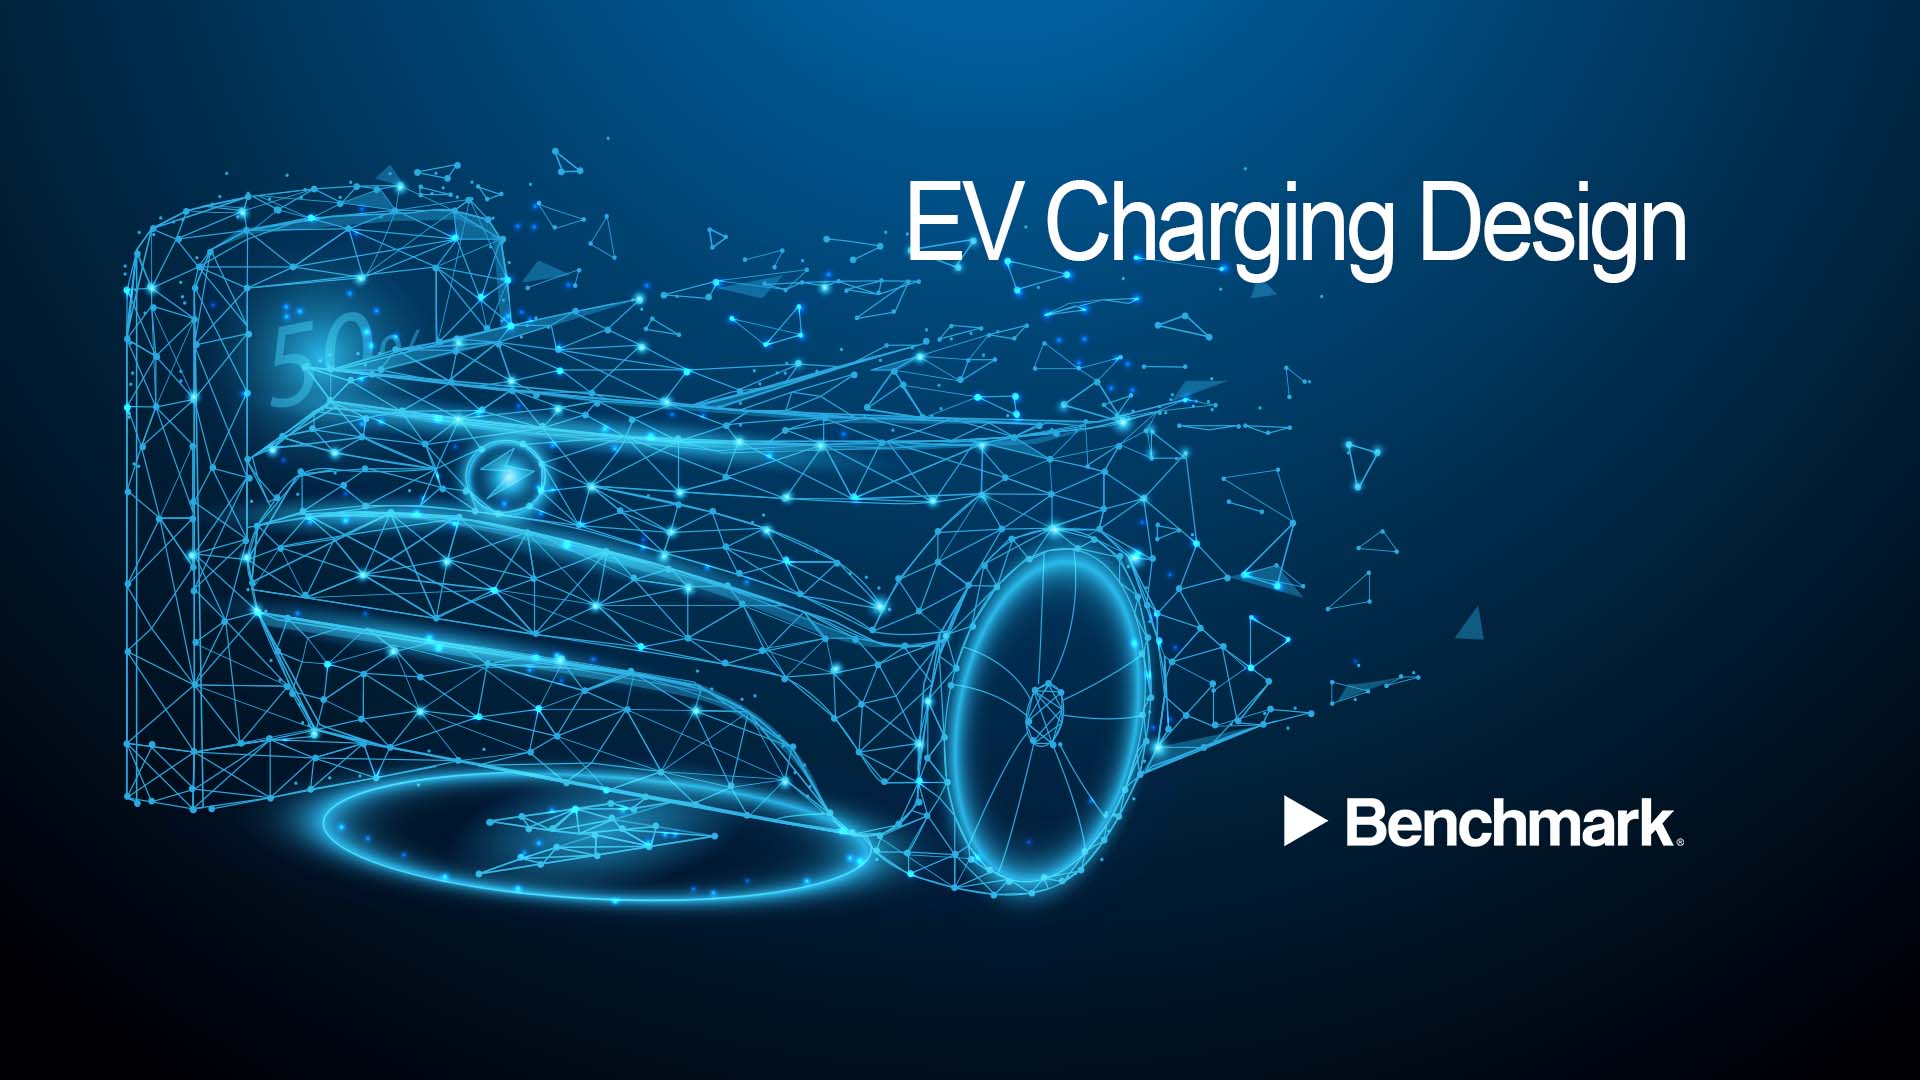 3 Top Considerations for Successful EV Charger Design